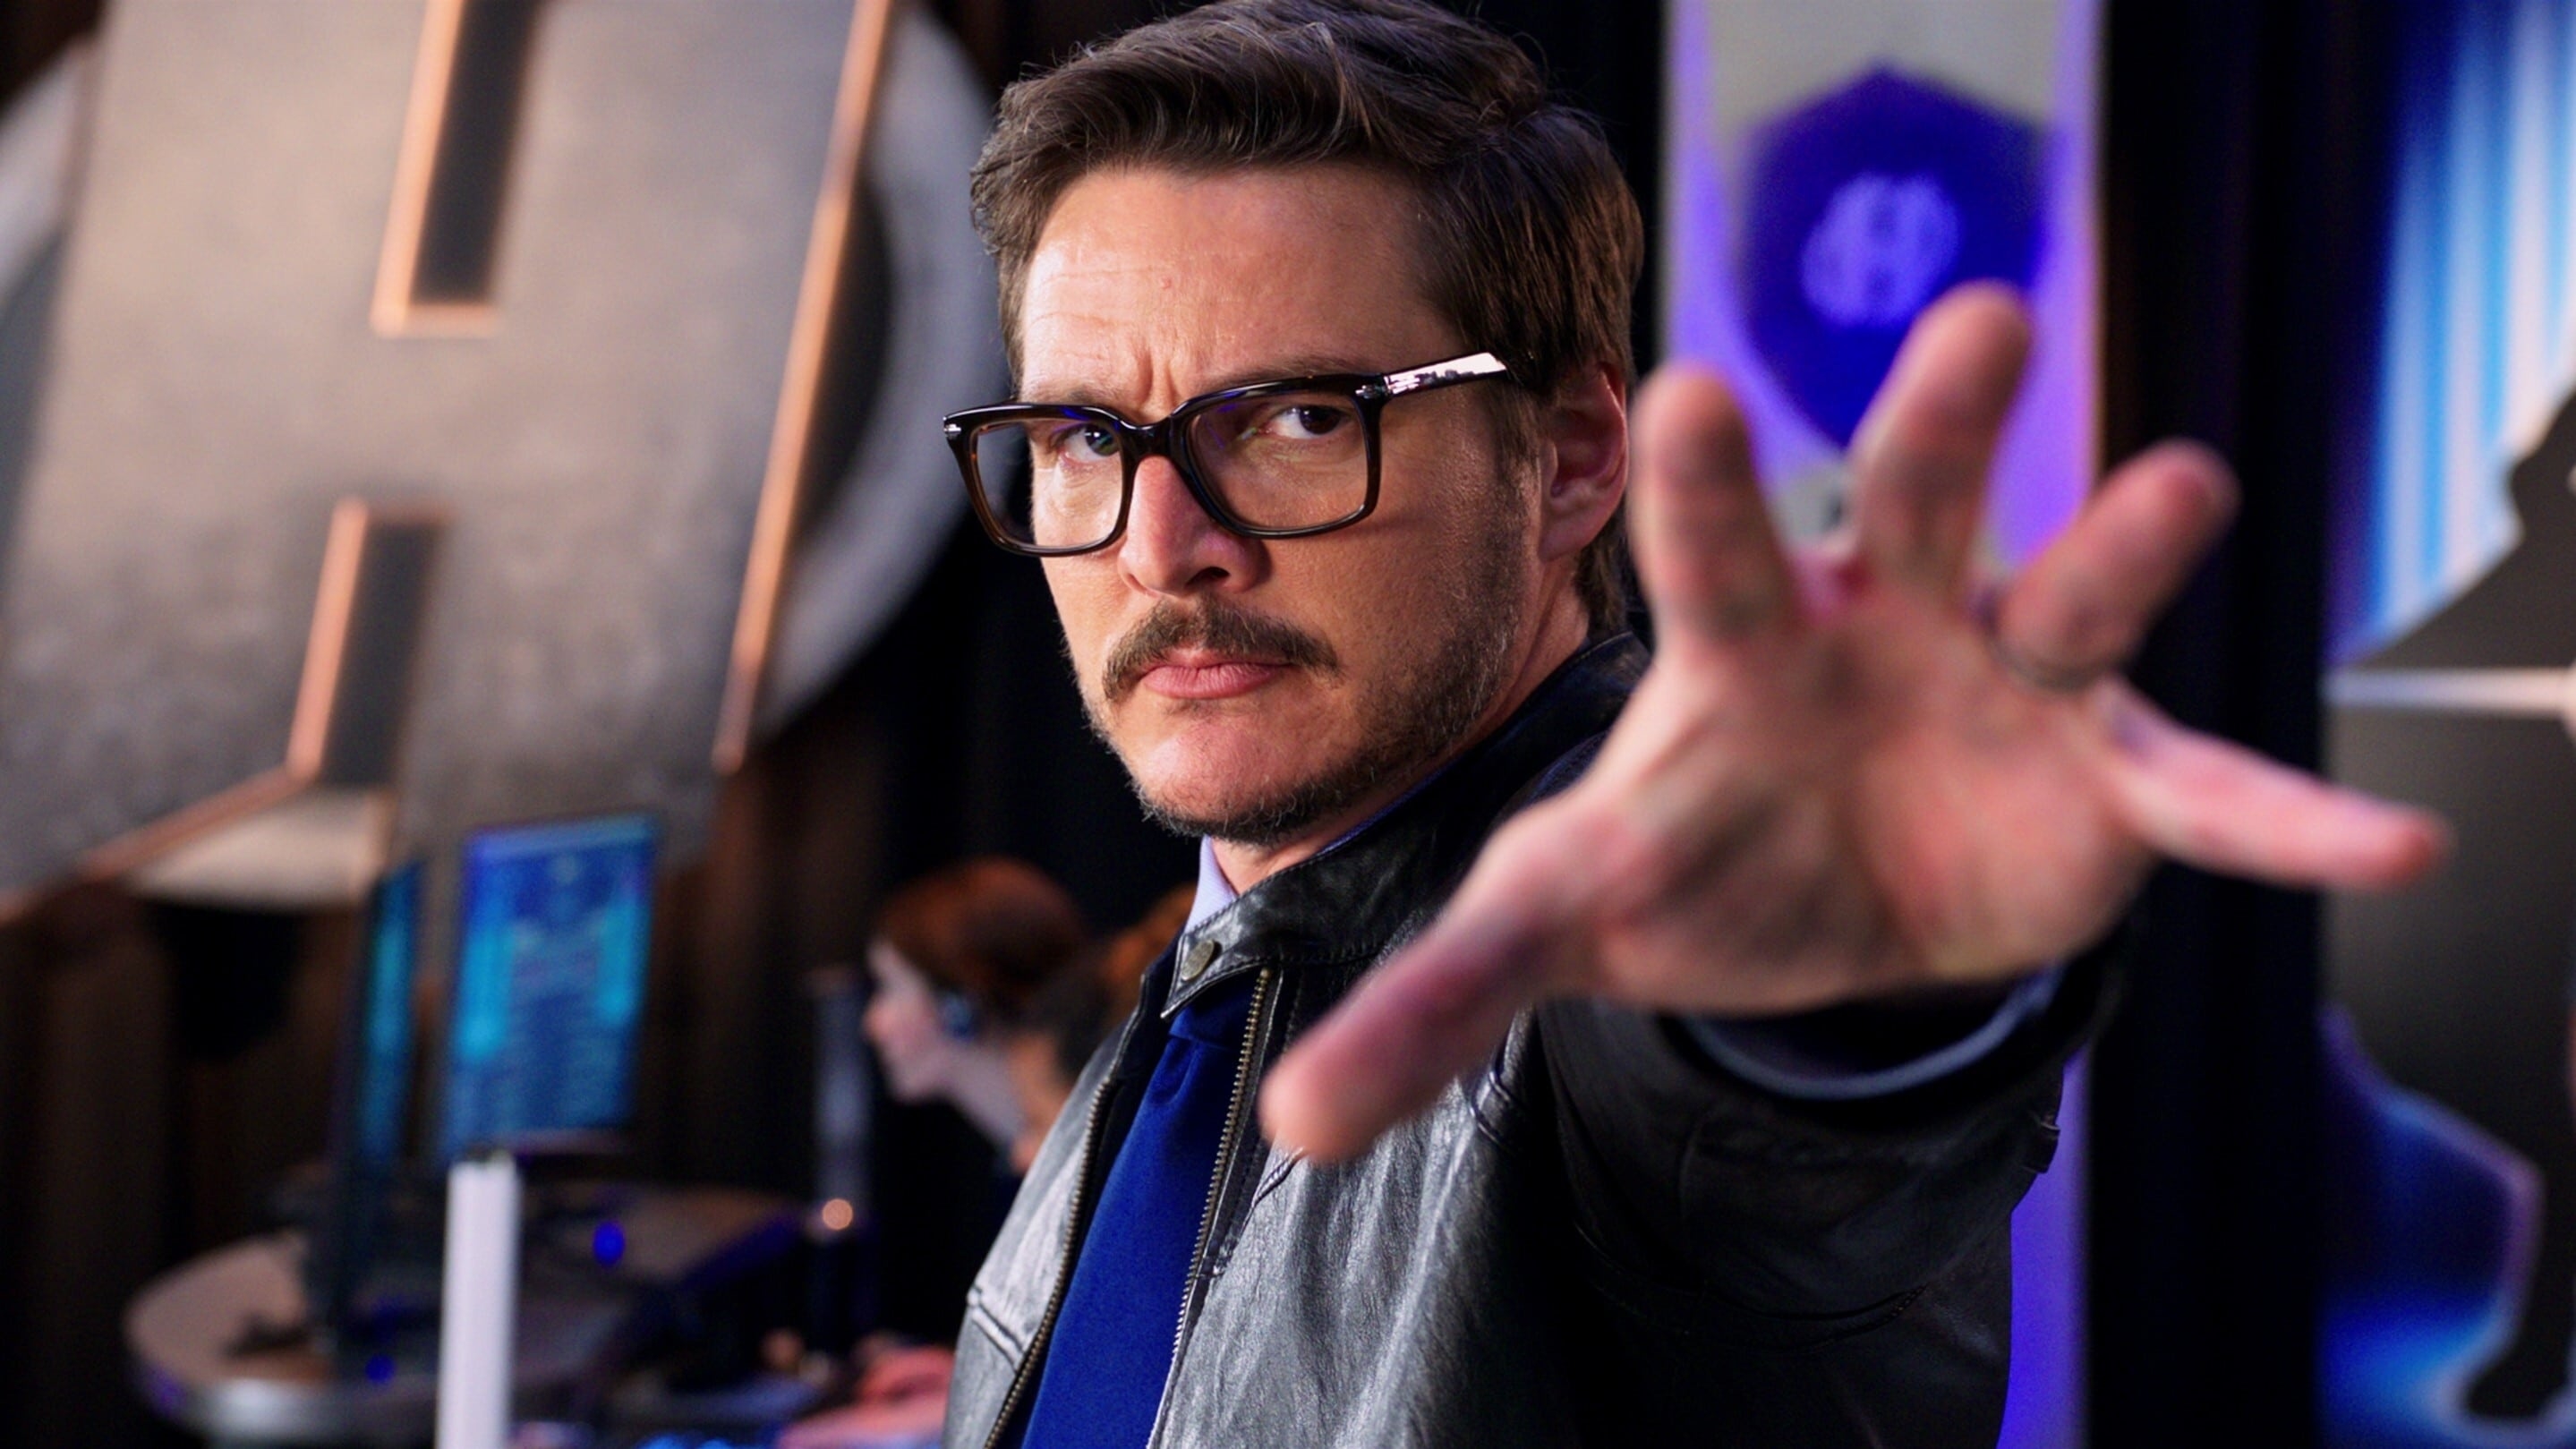 3840x2160202199 Pedro Pascal We Can Be Heroes 3840x2160202199